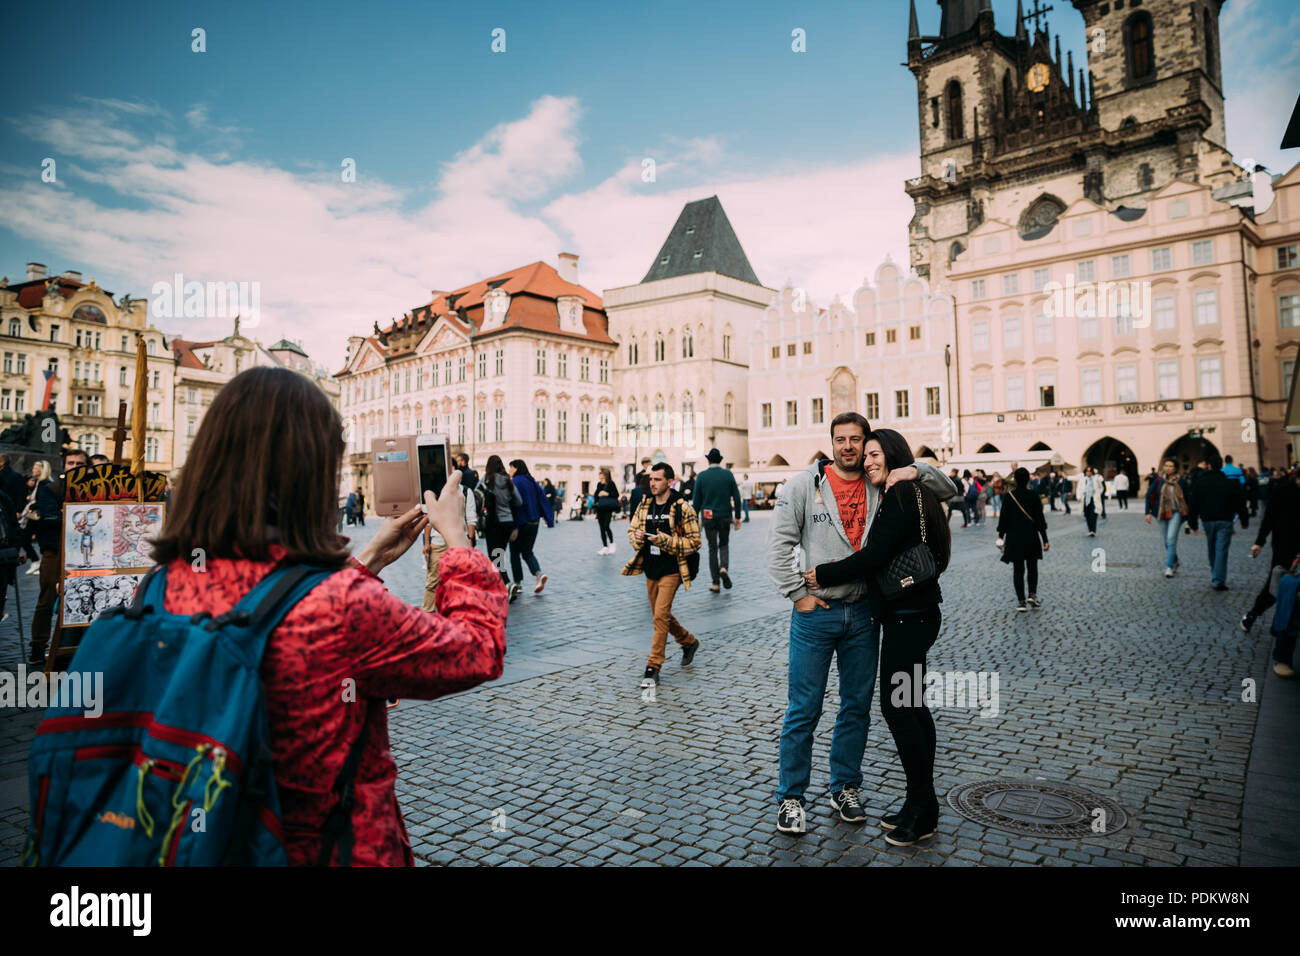 Prague, Czech Republic - September 22, 2017: Woman Photographs Tourists On Smartphone Near Church Of Our Lady Before Tyn In Old Town Square. Stock Photo